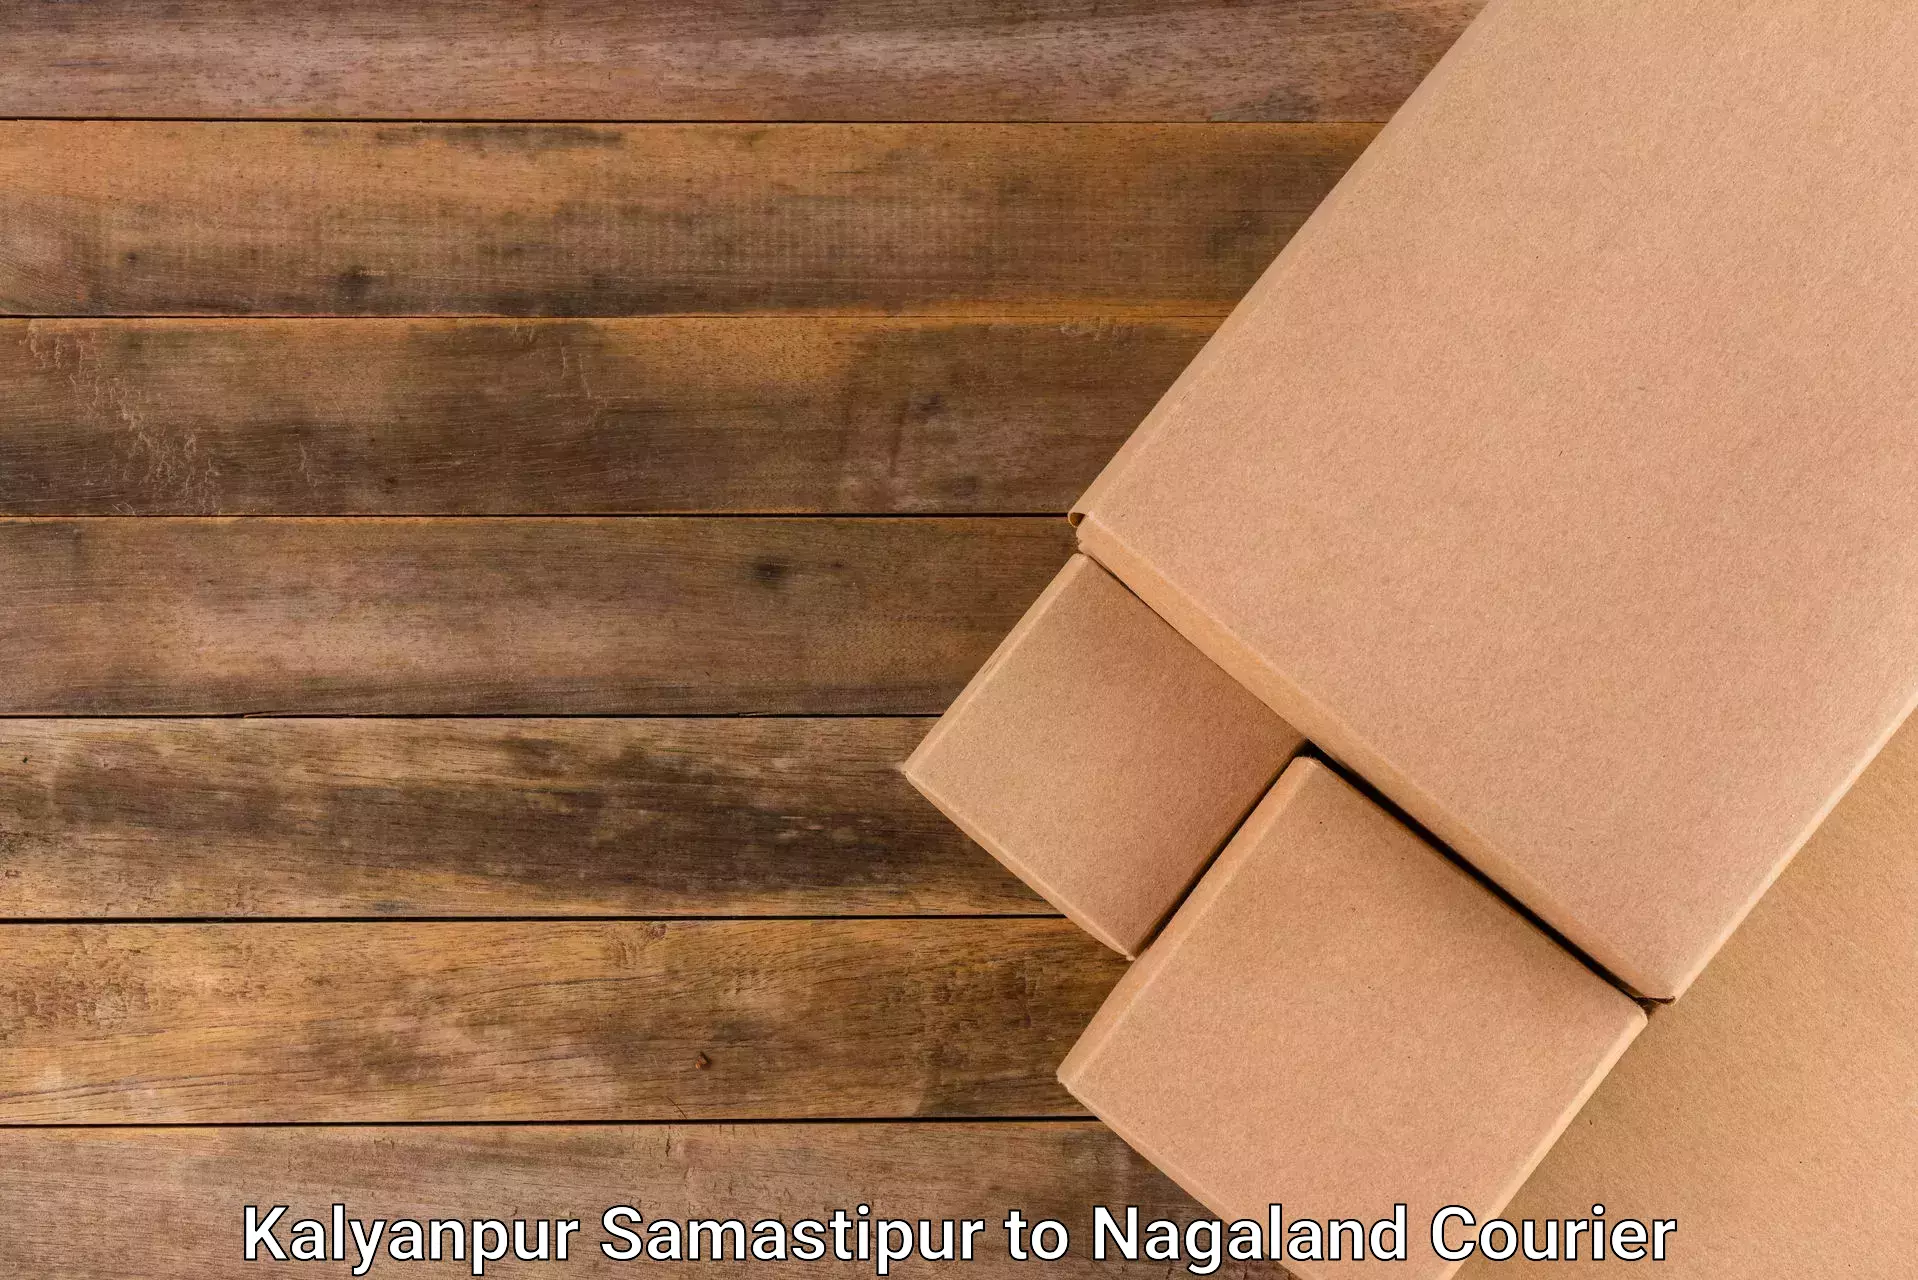 Reliable courier service Kalyanpur Samastipur to Dimapur